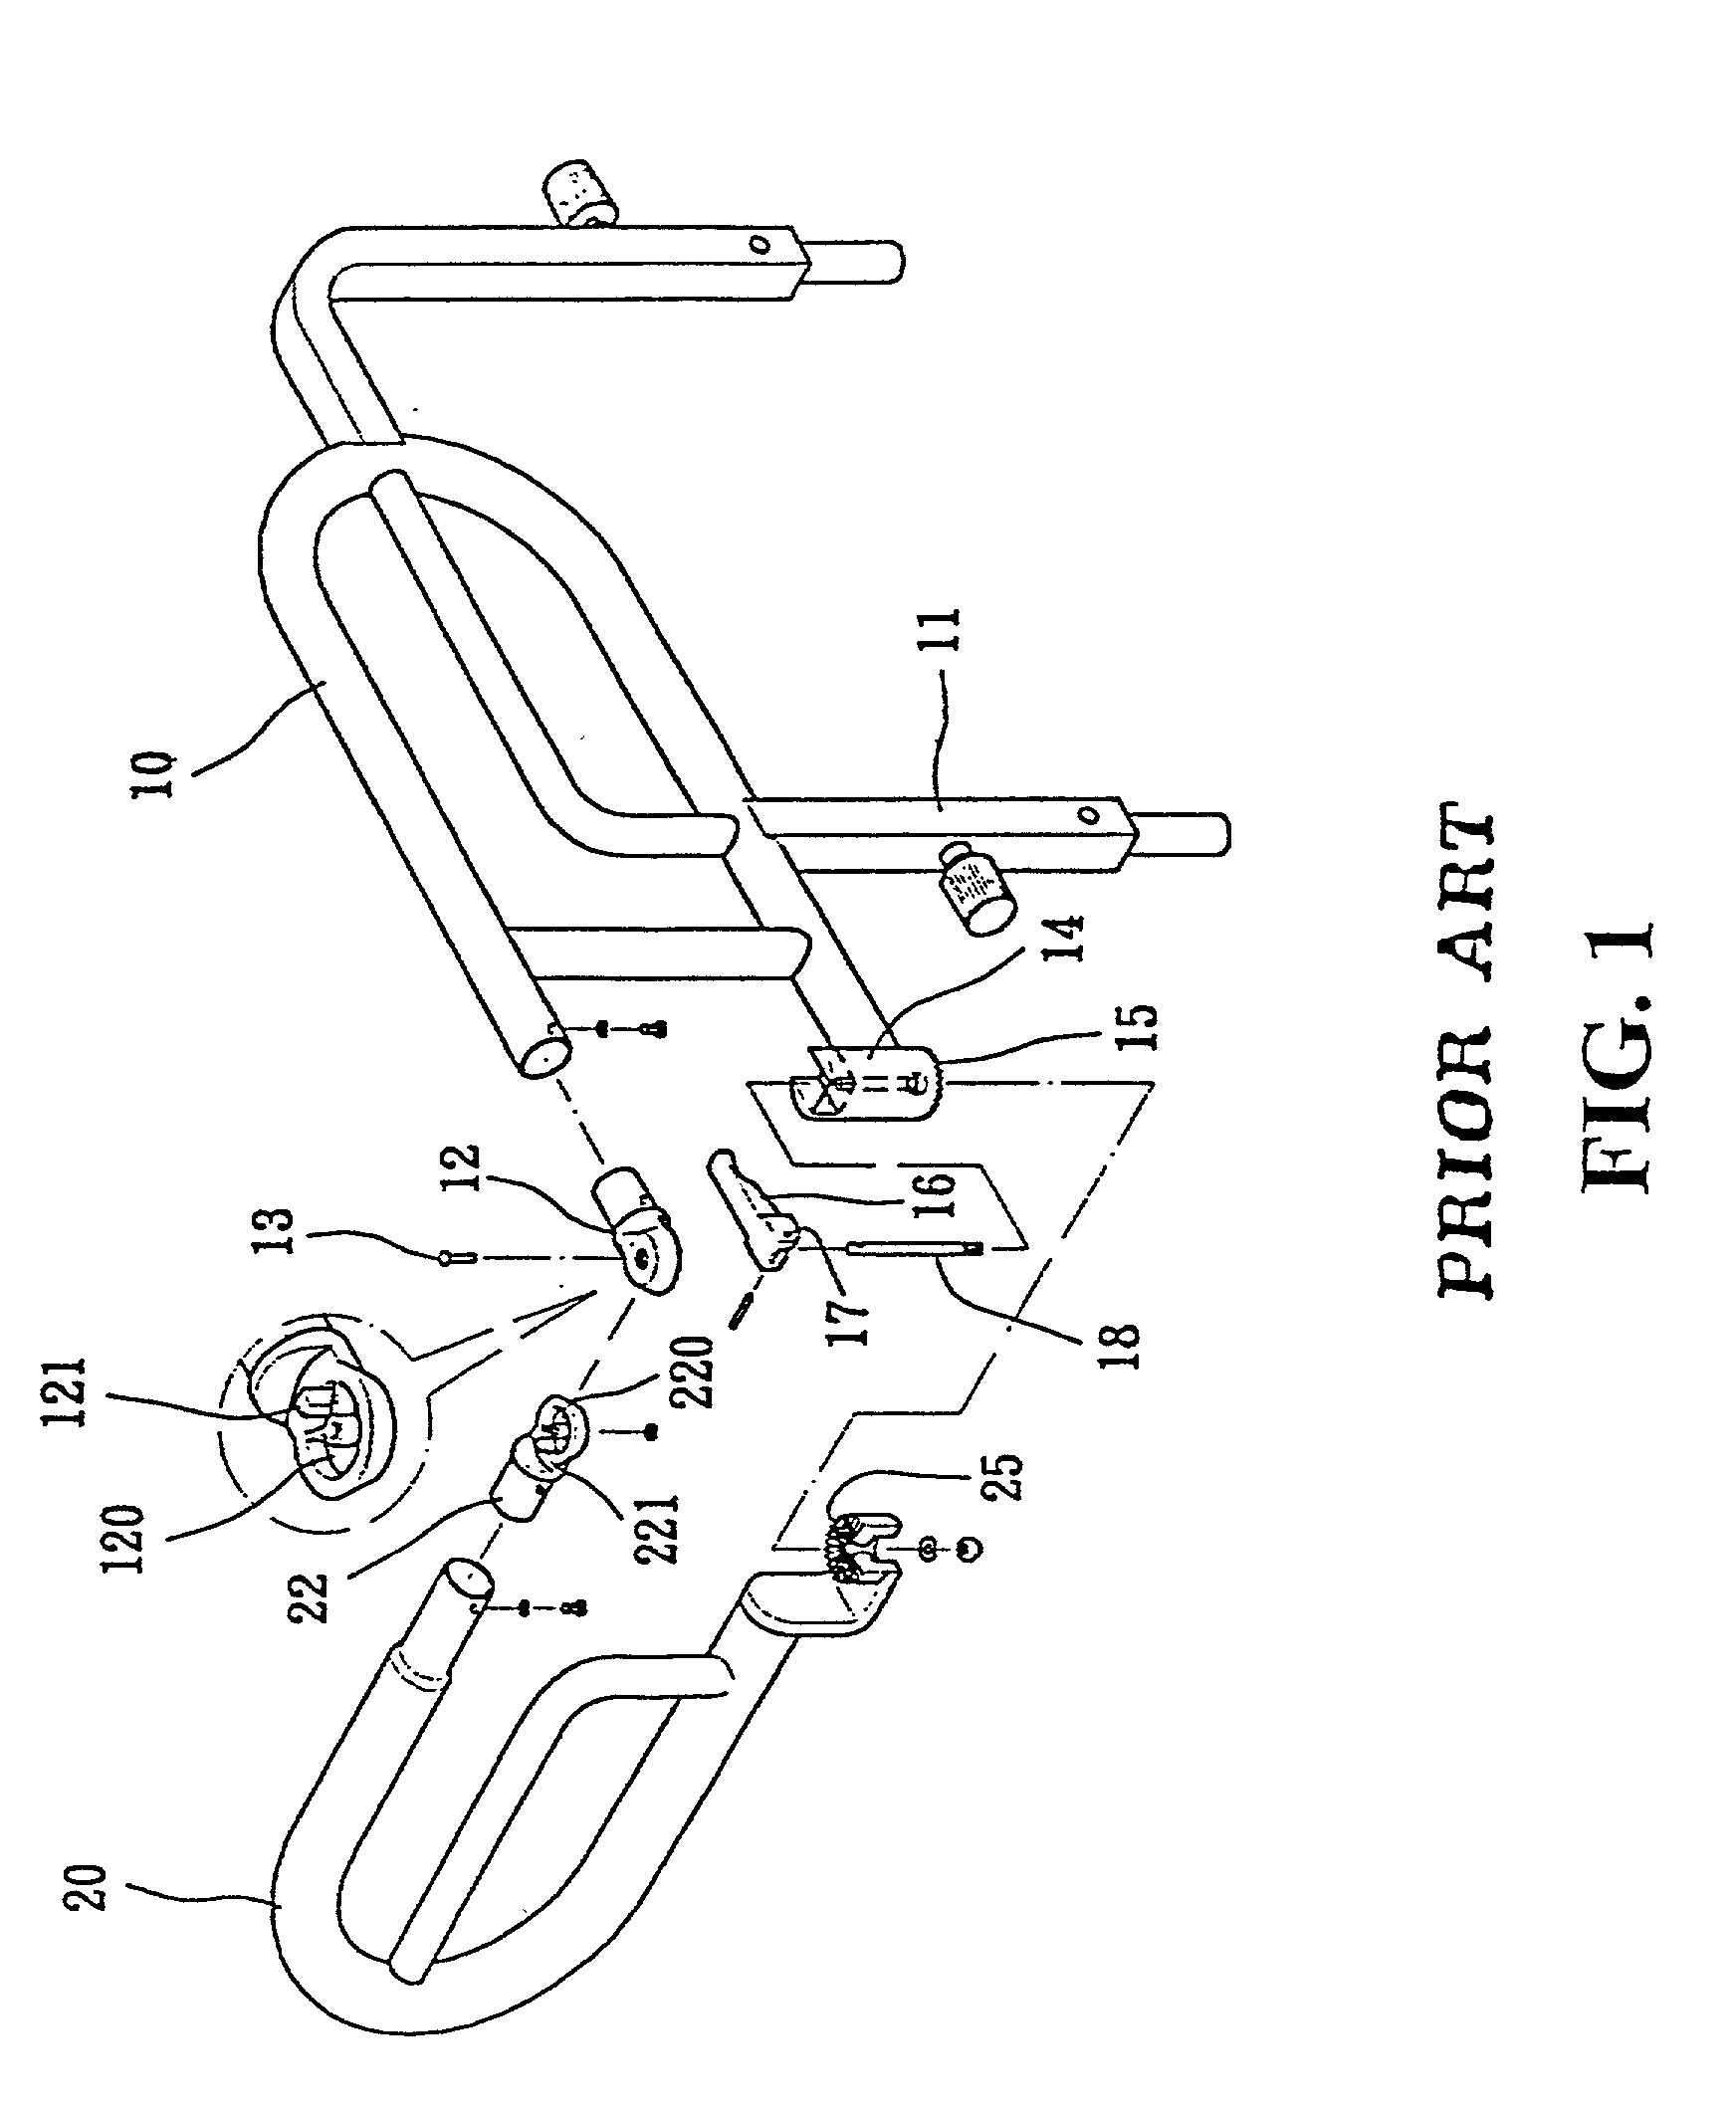 Self-positioning structure with adjustable frame body